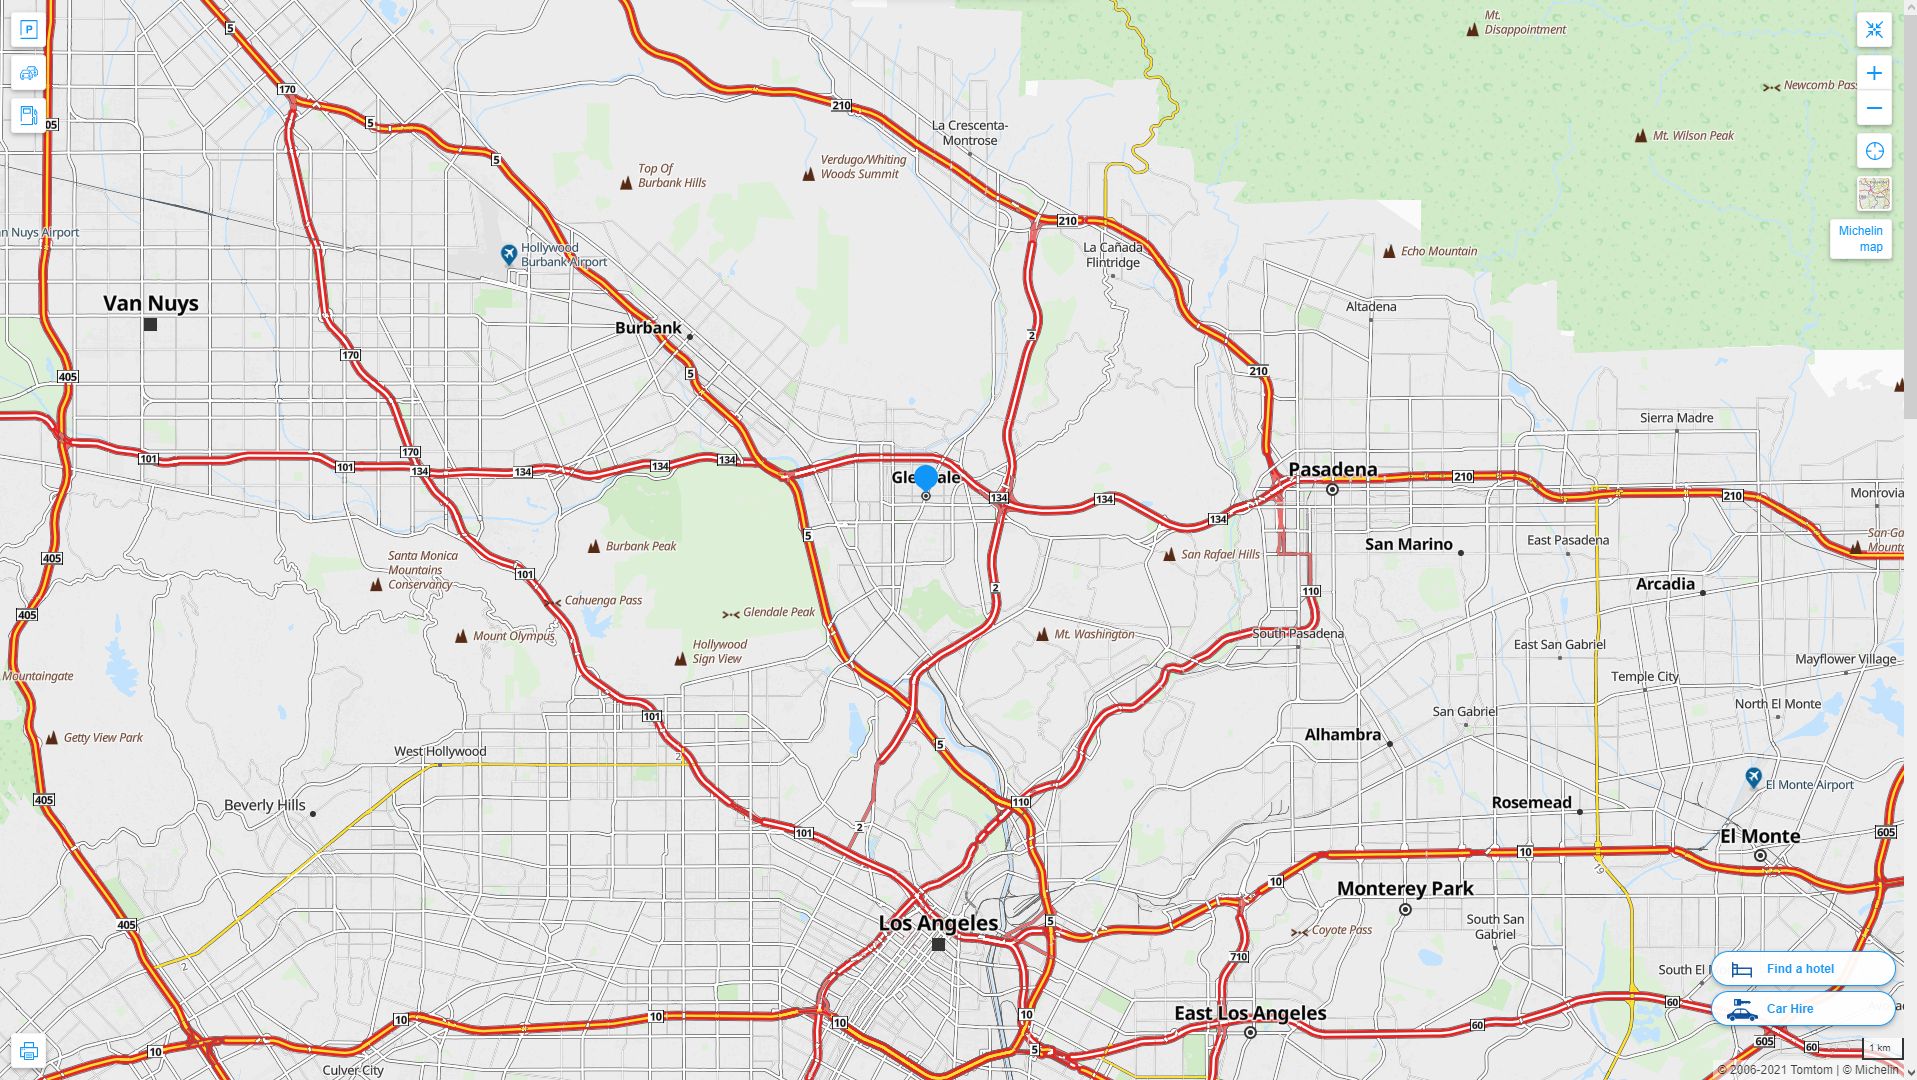 Glendale California Highway and Road Map